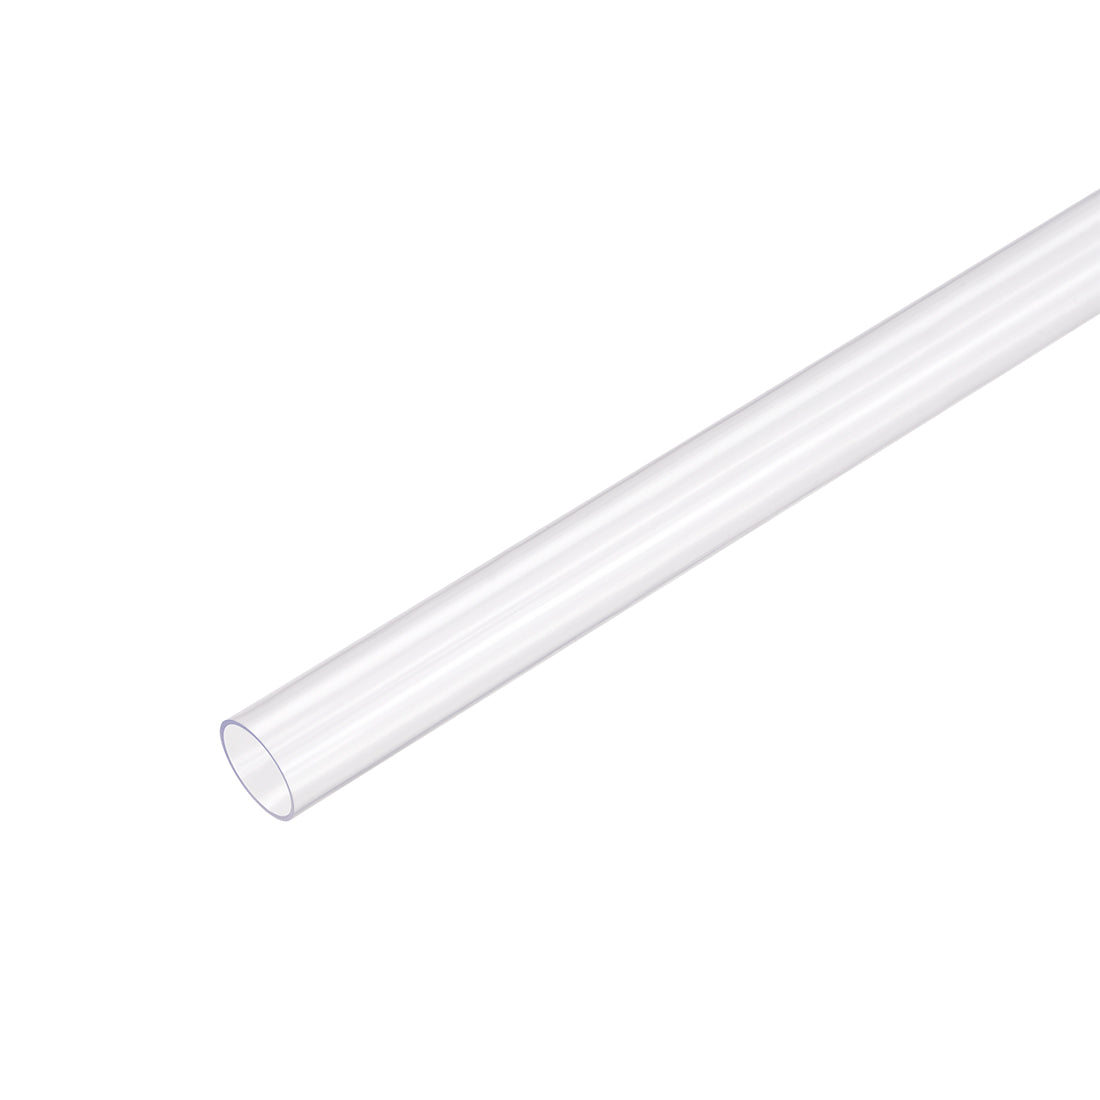 uxcell Uxcell PVC Rigid Round Tubing,Clear,9mm ID x 10mm OD,0.5M/1.64Ft Length